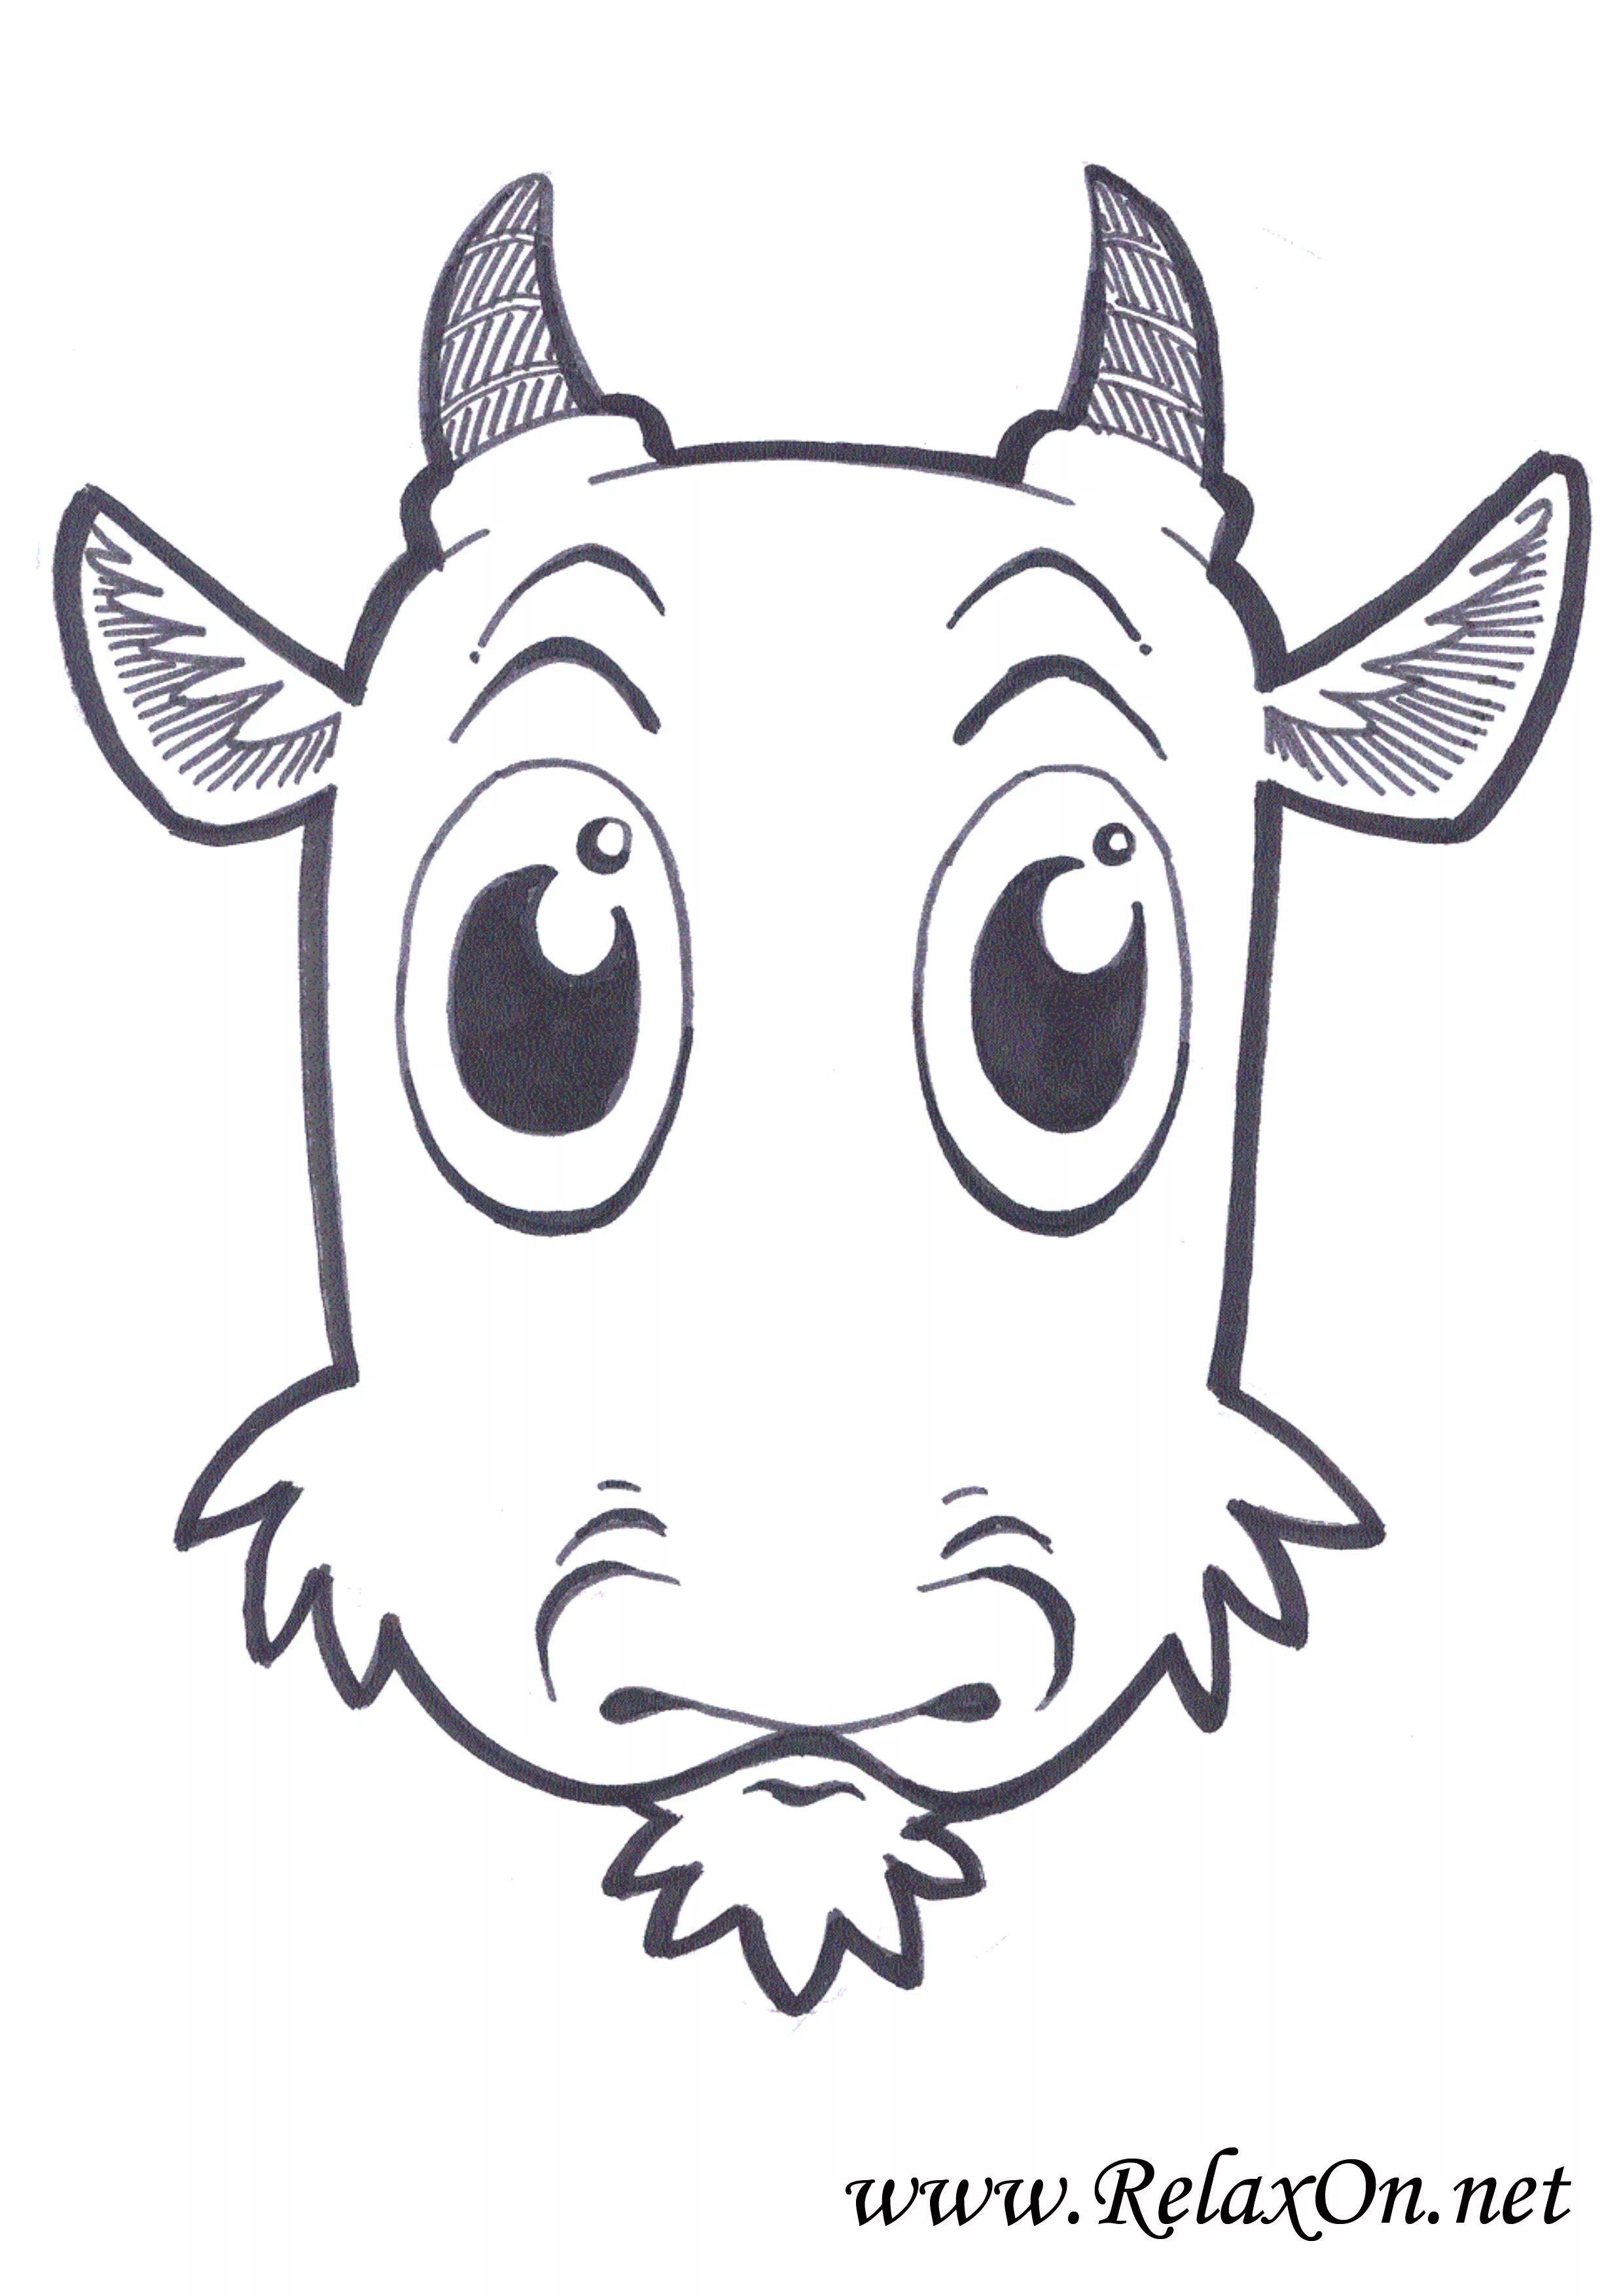 Colourful goat mask coloring page